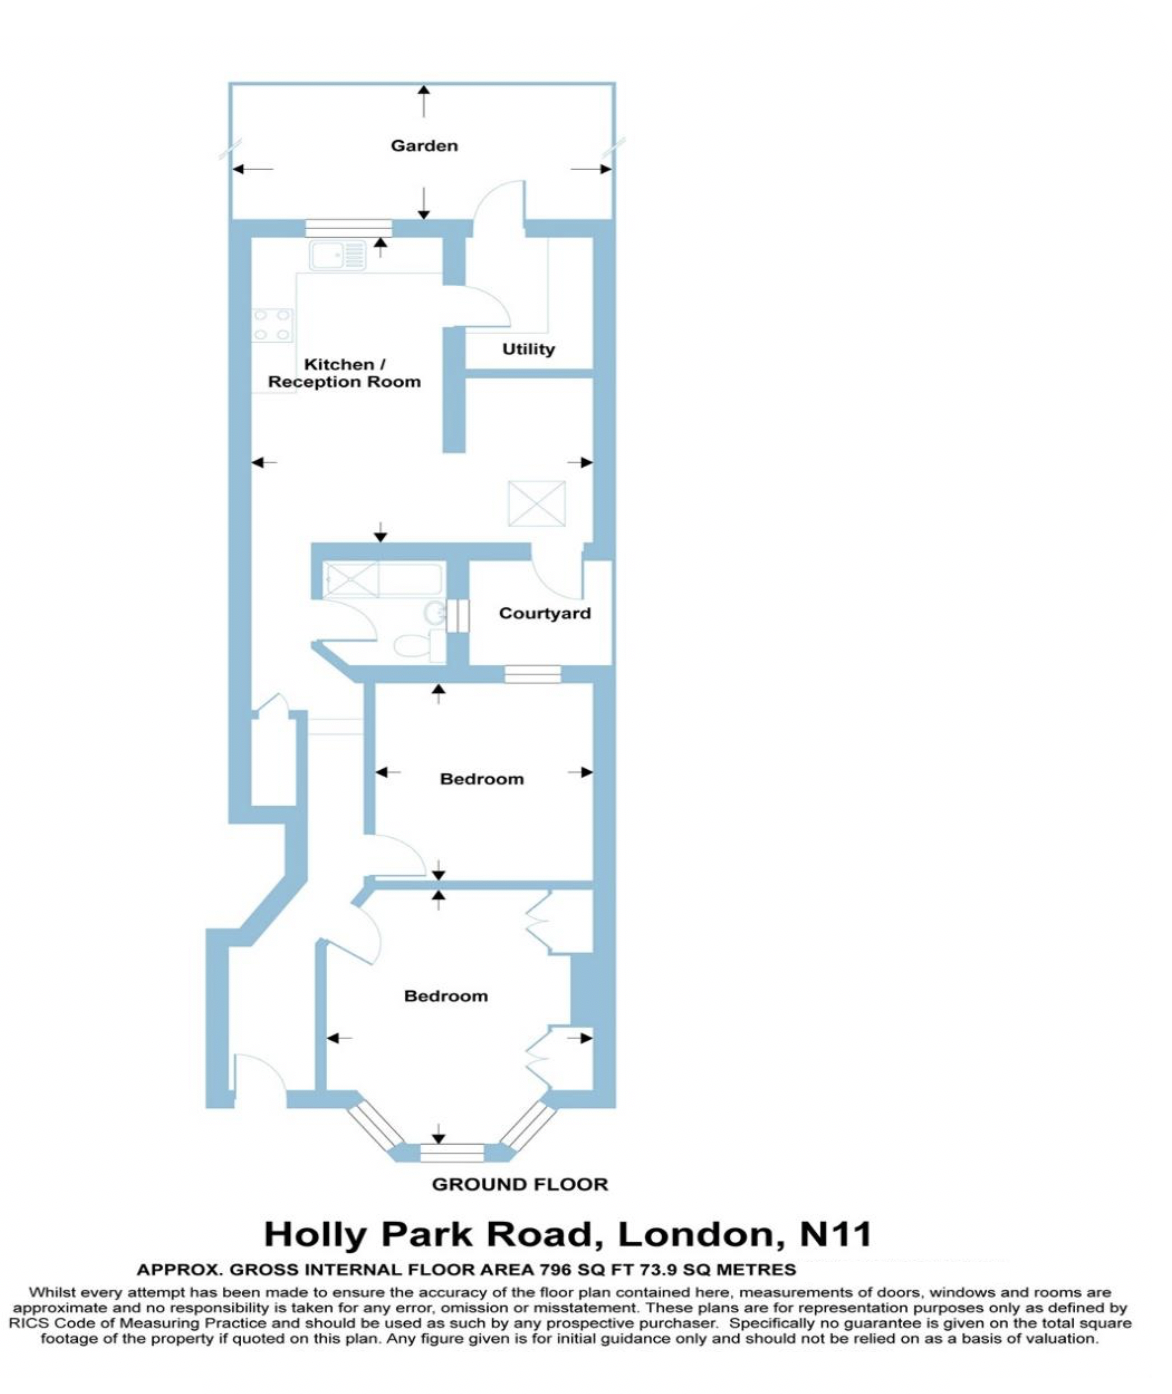 2 Bedrooms Flat to rent in Holly Park Road, Friern Barnet N11